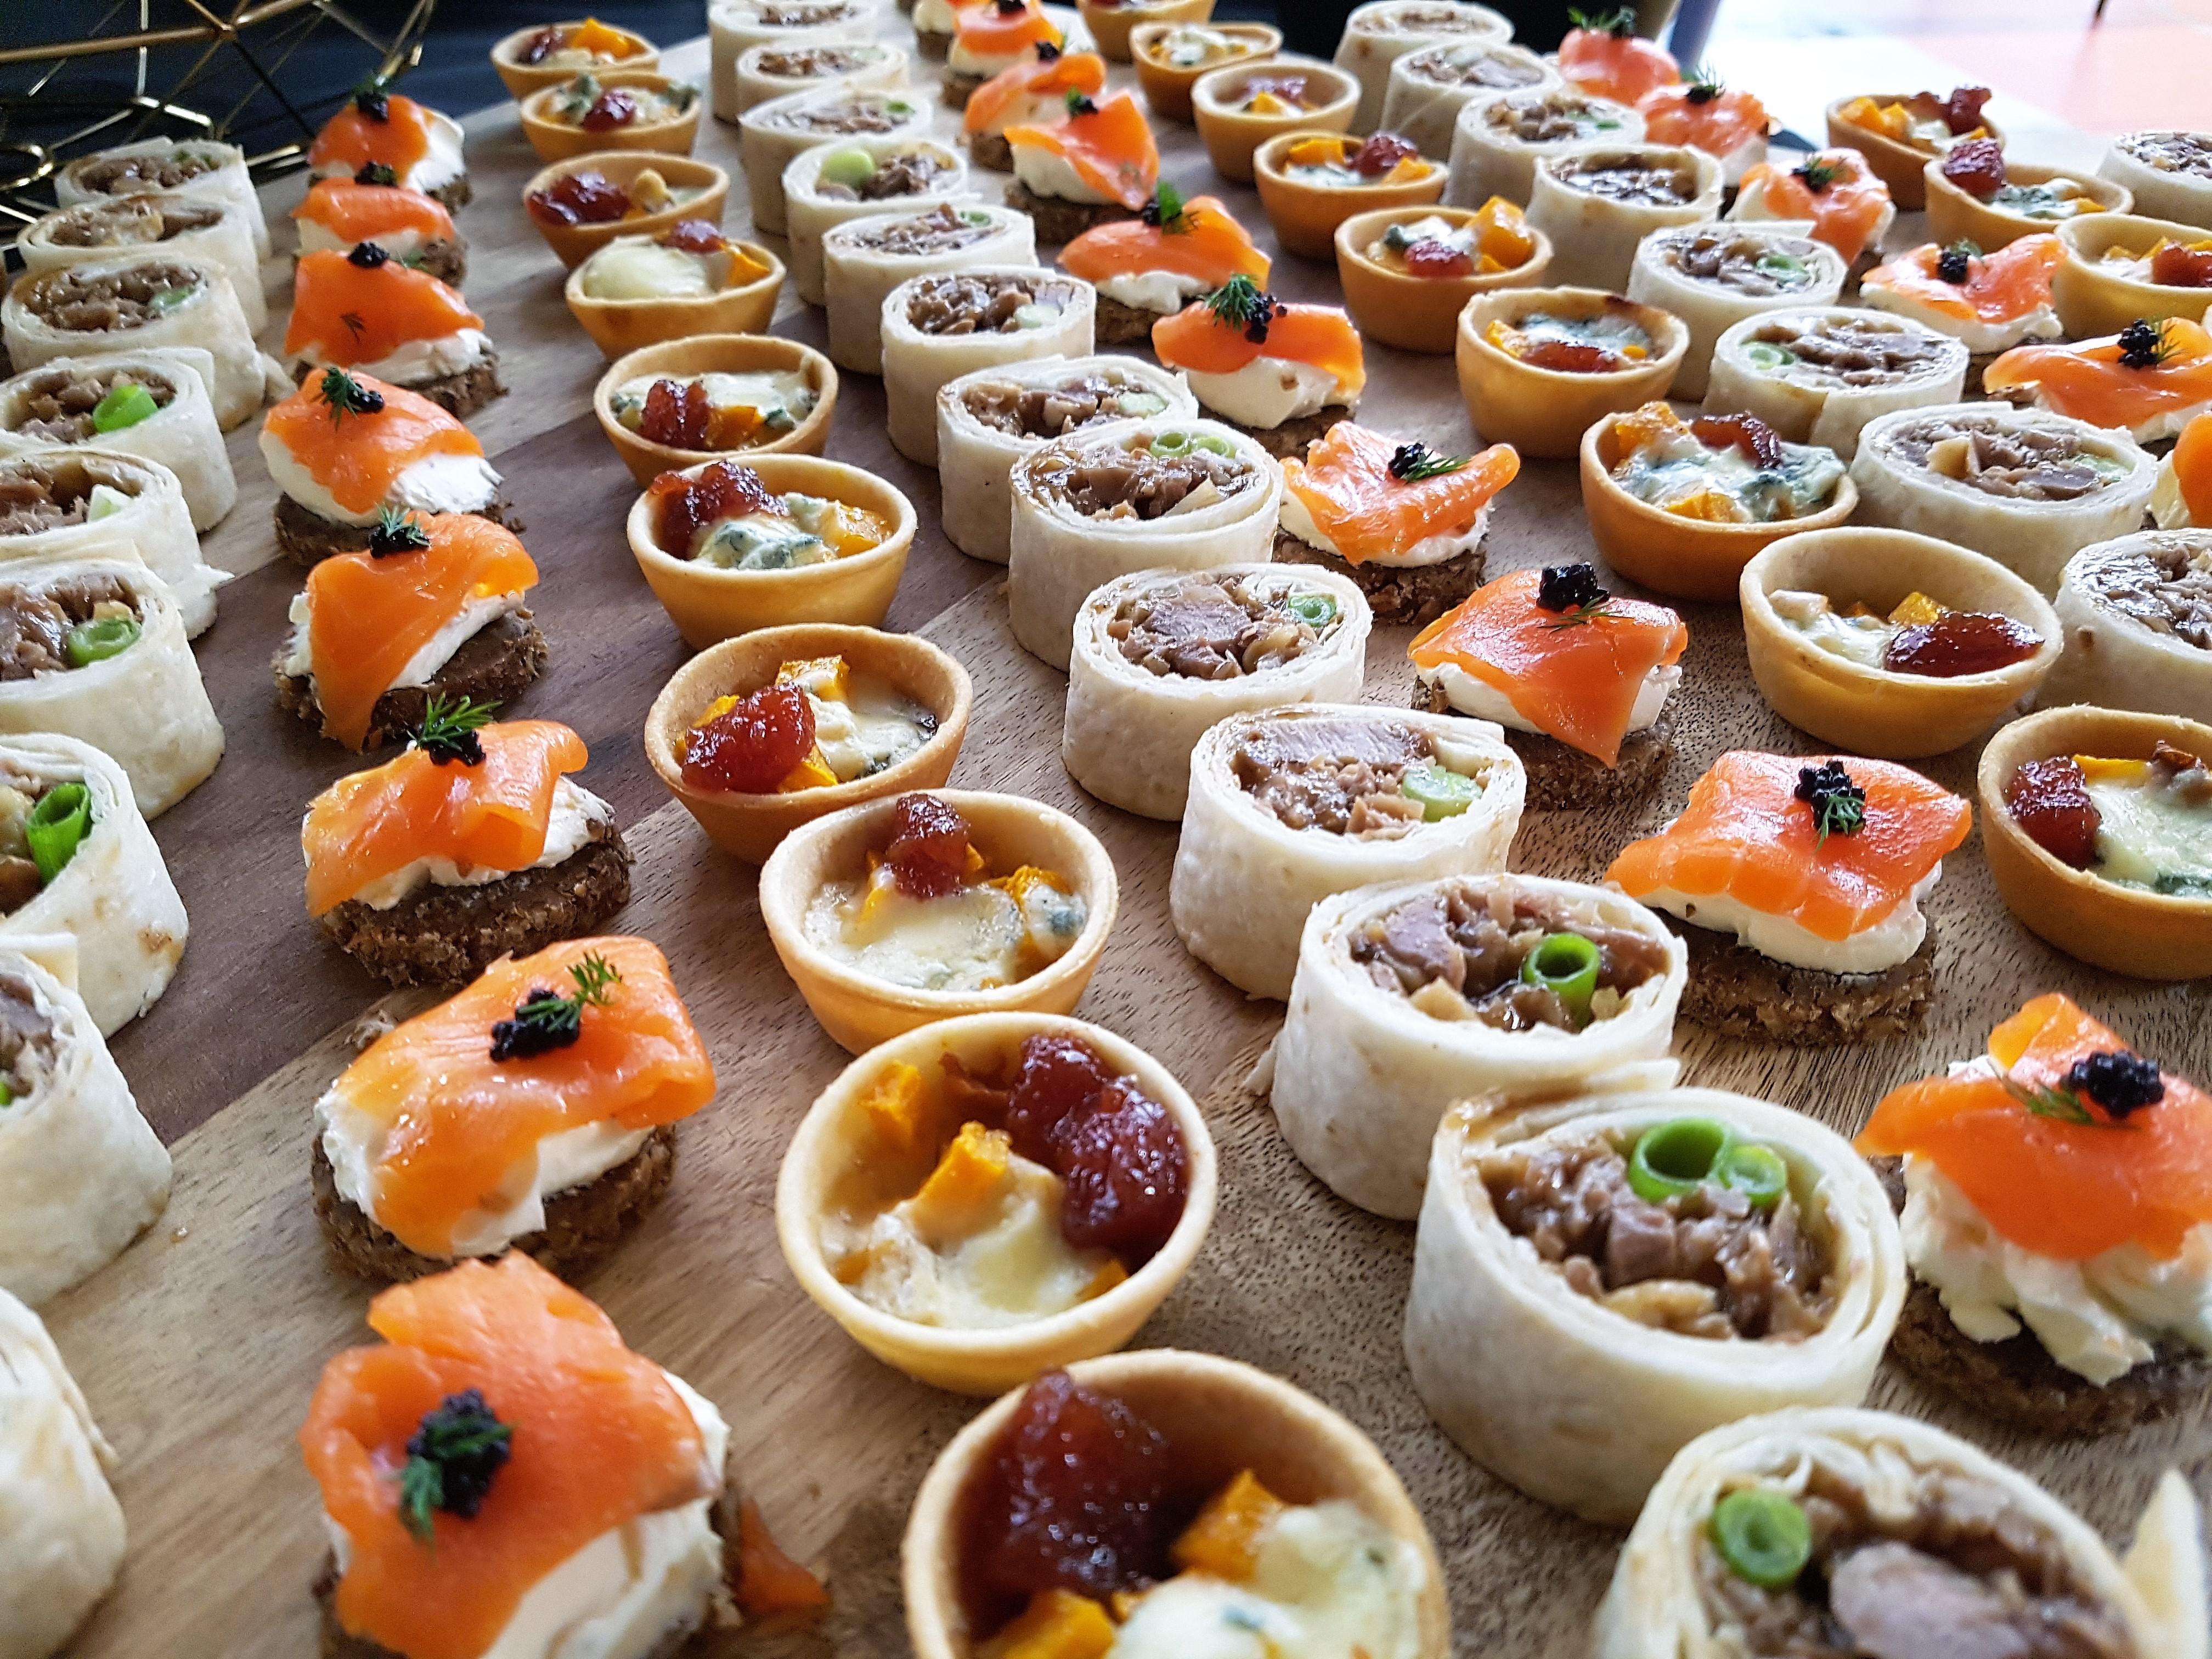 Images Samphire Catering